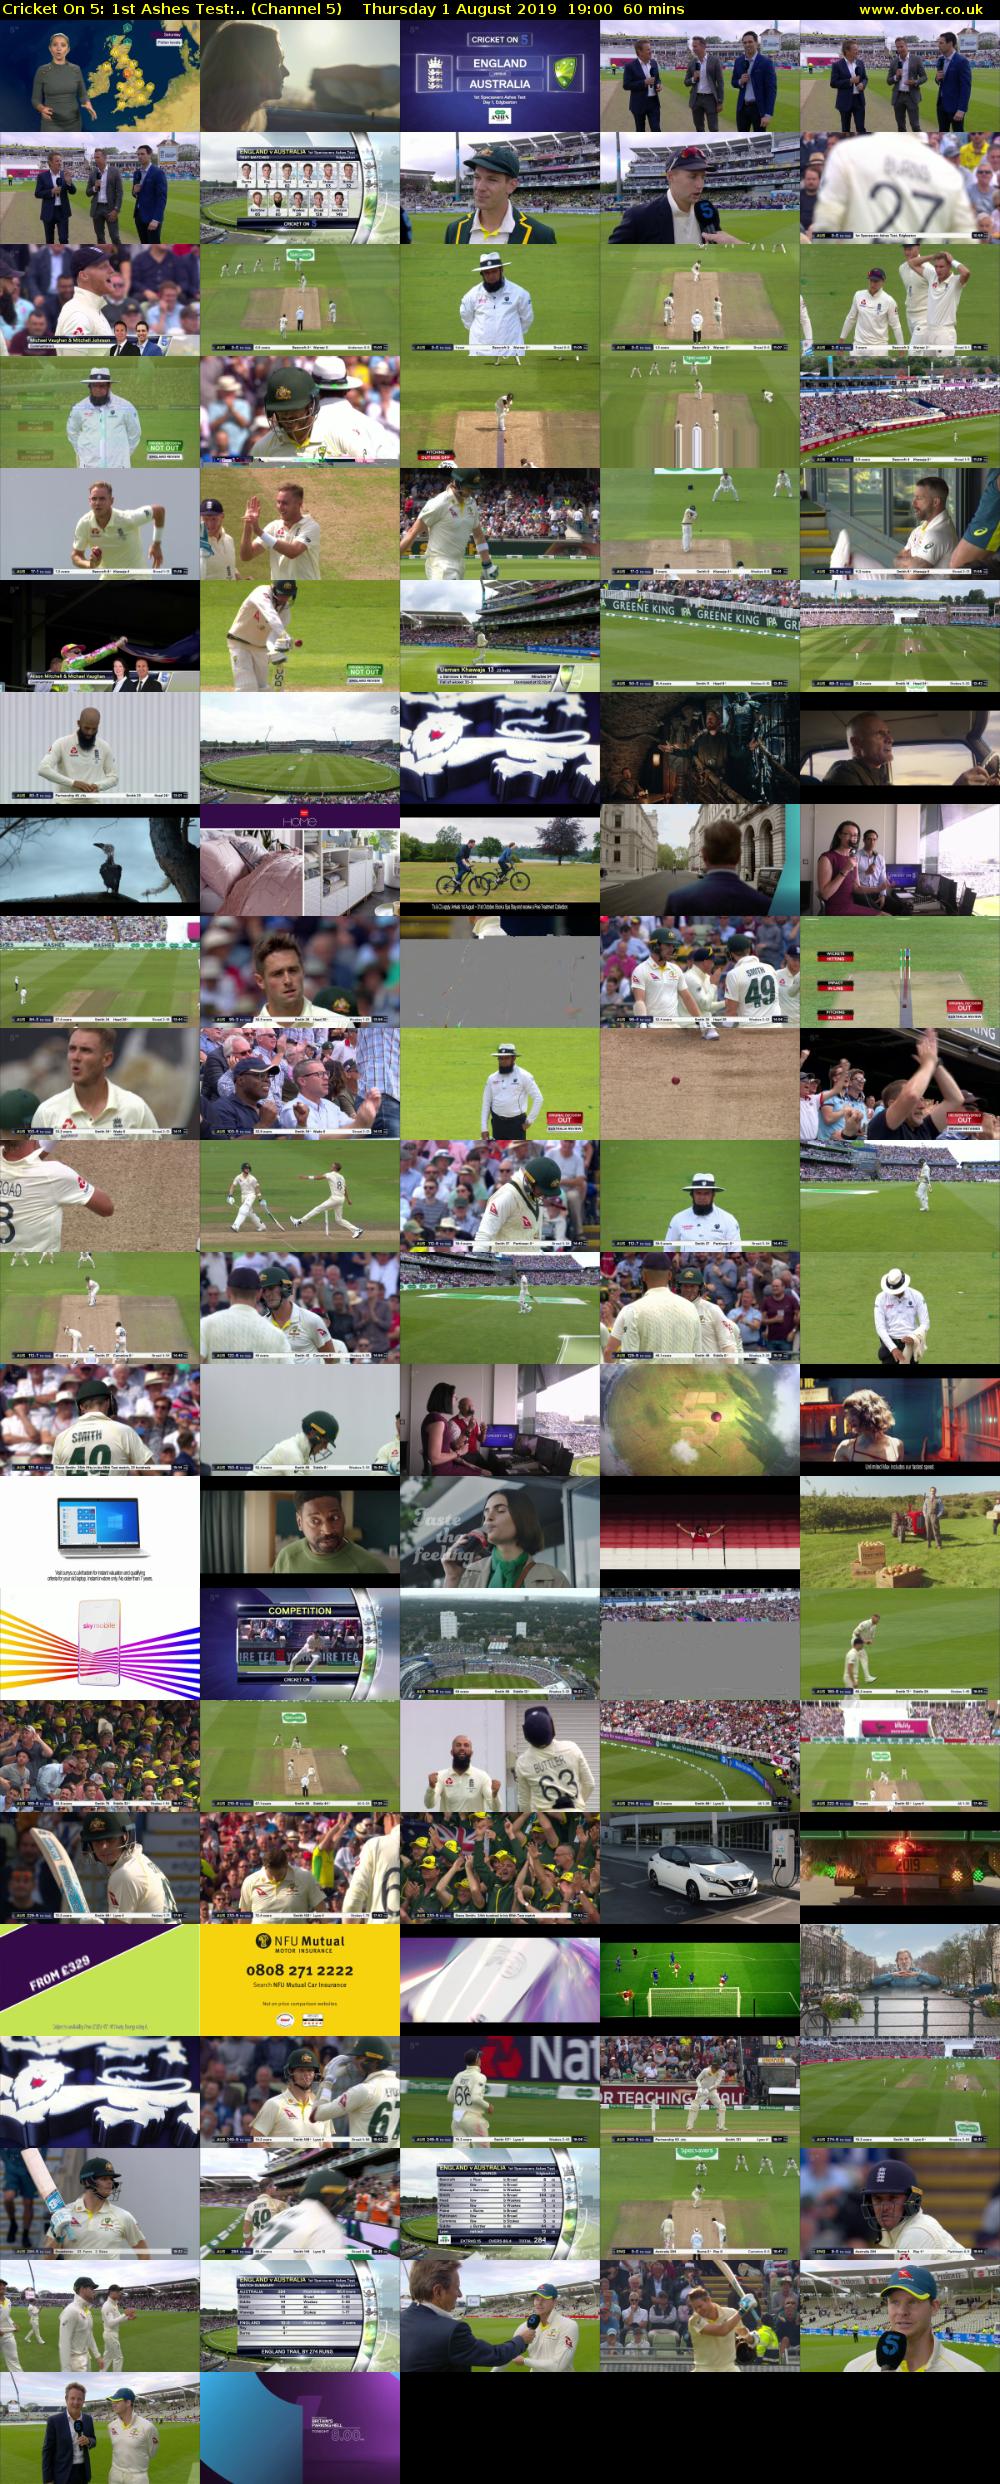 Cricket On 5: 1st Ashes Test:.. (Channel 5) Thursday 1 August 2019 19:00 - 20:00